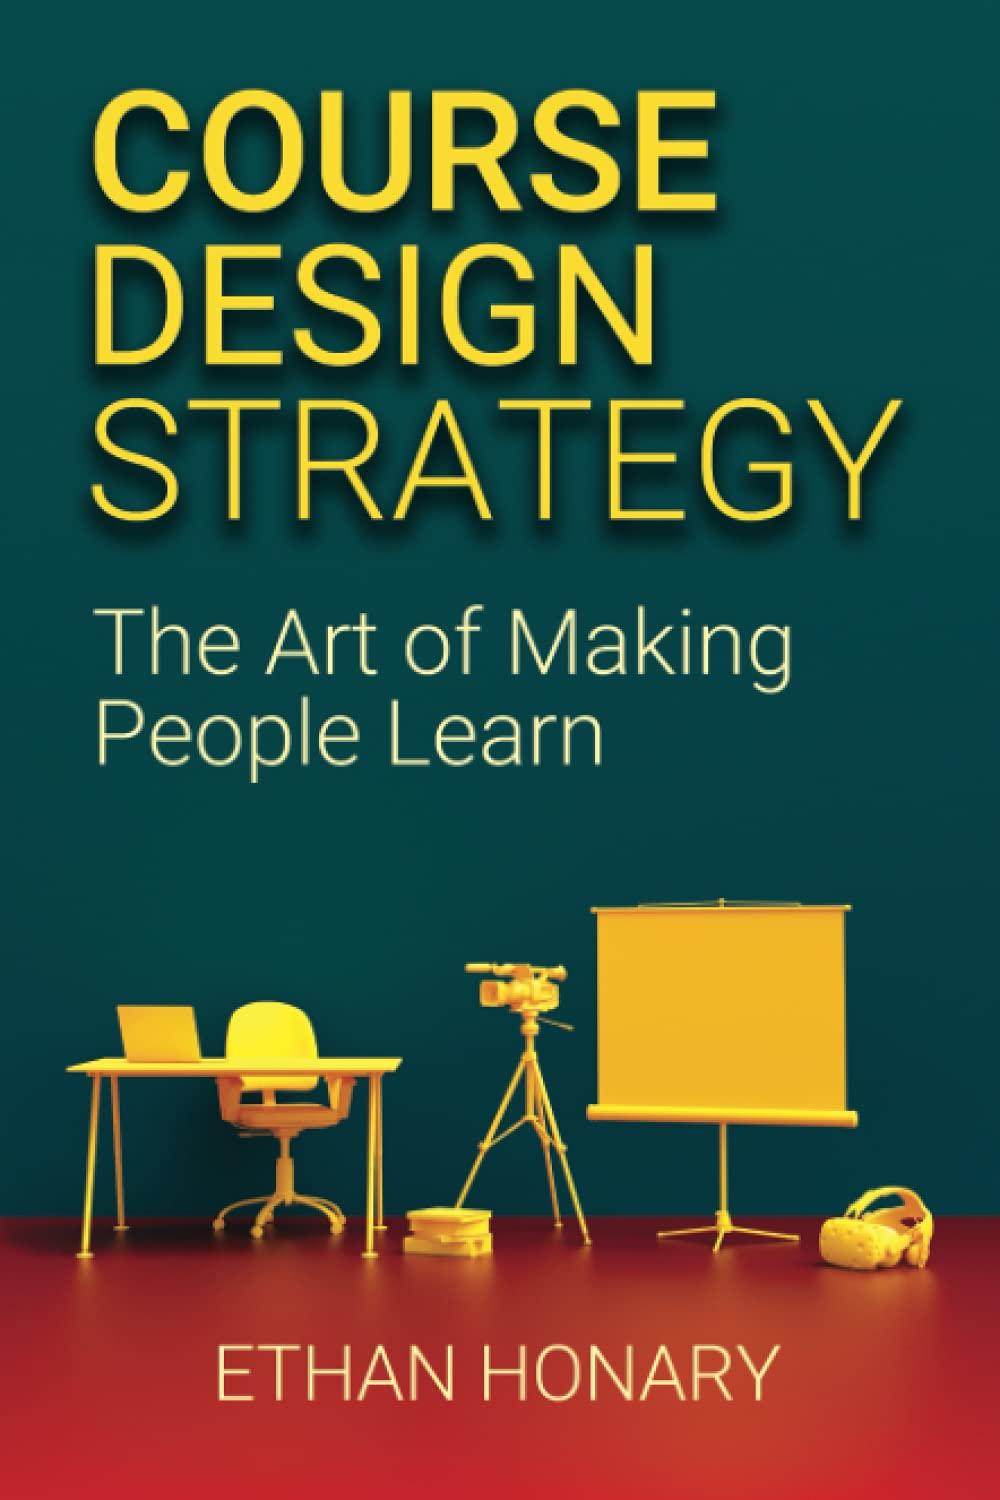 course design strategy the art of making people learn 1st edition ethan honary 1838495304, 978-1838495305